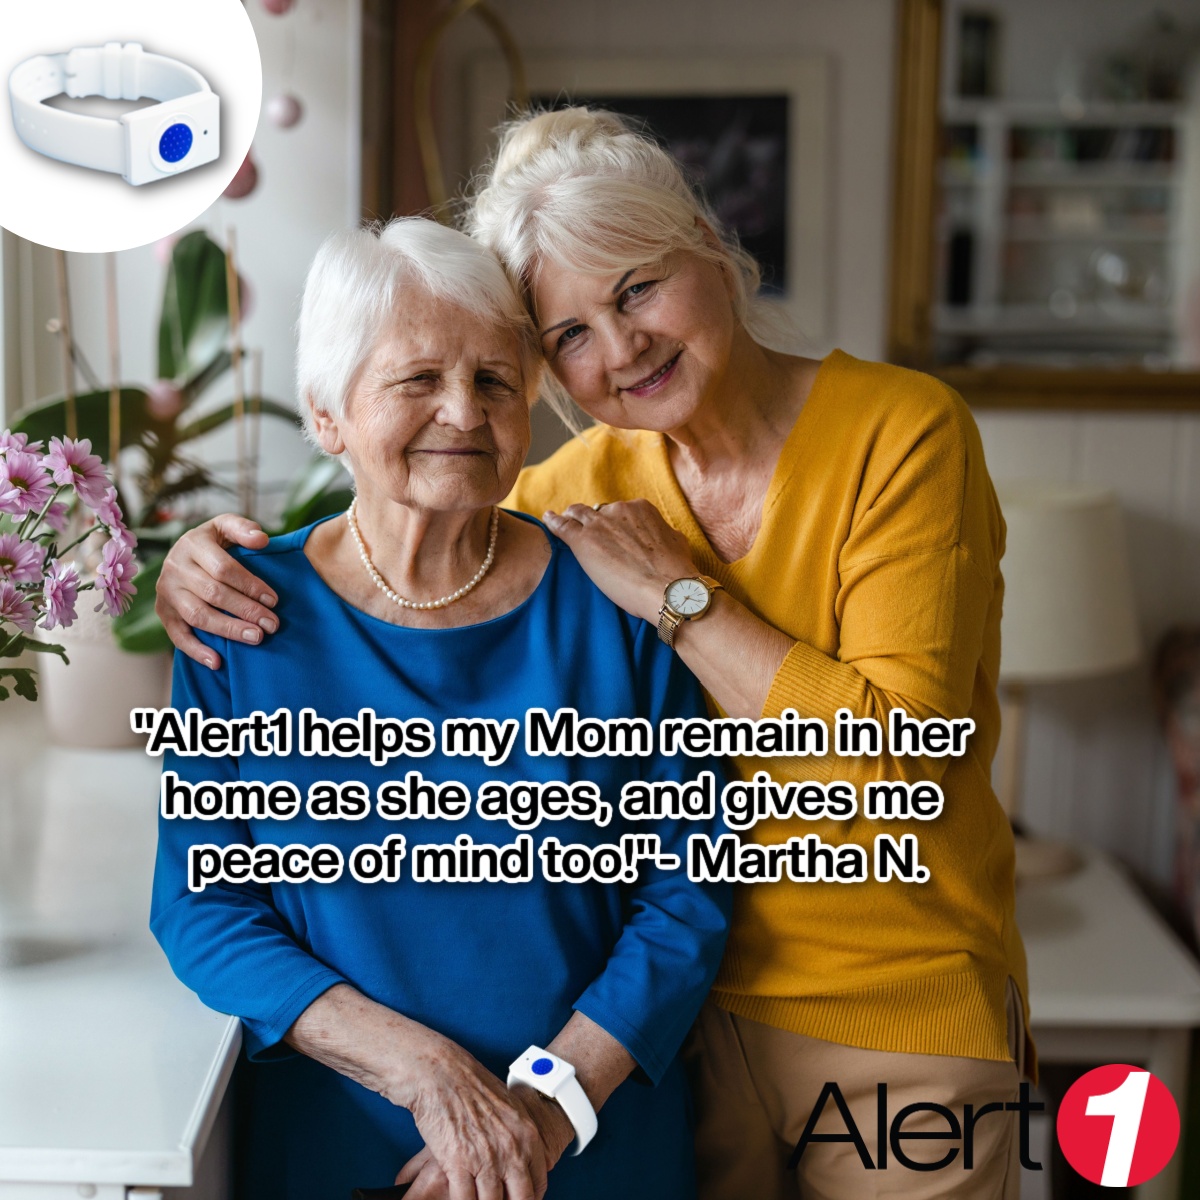 If you or your loved one wants to age at home, let Alert1 be your #safety companion! Press the button & get help fast, 24/7. #free equipment & lowest service rates- starting at just $18.95/mo. Call now 888-981-9844 to get started!
#TestimonialTuesday #review #deals #AgingInPlace